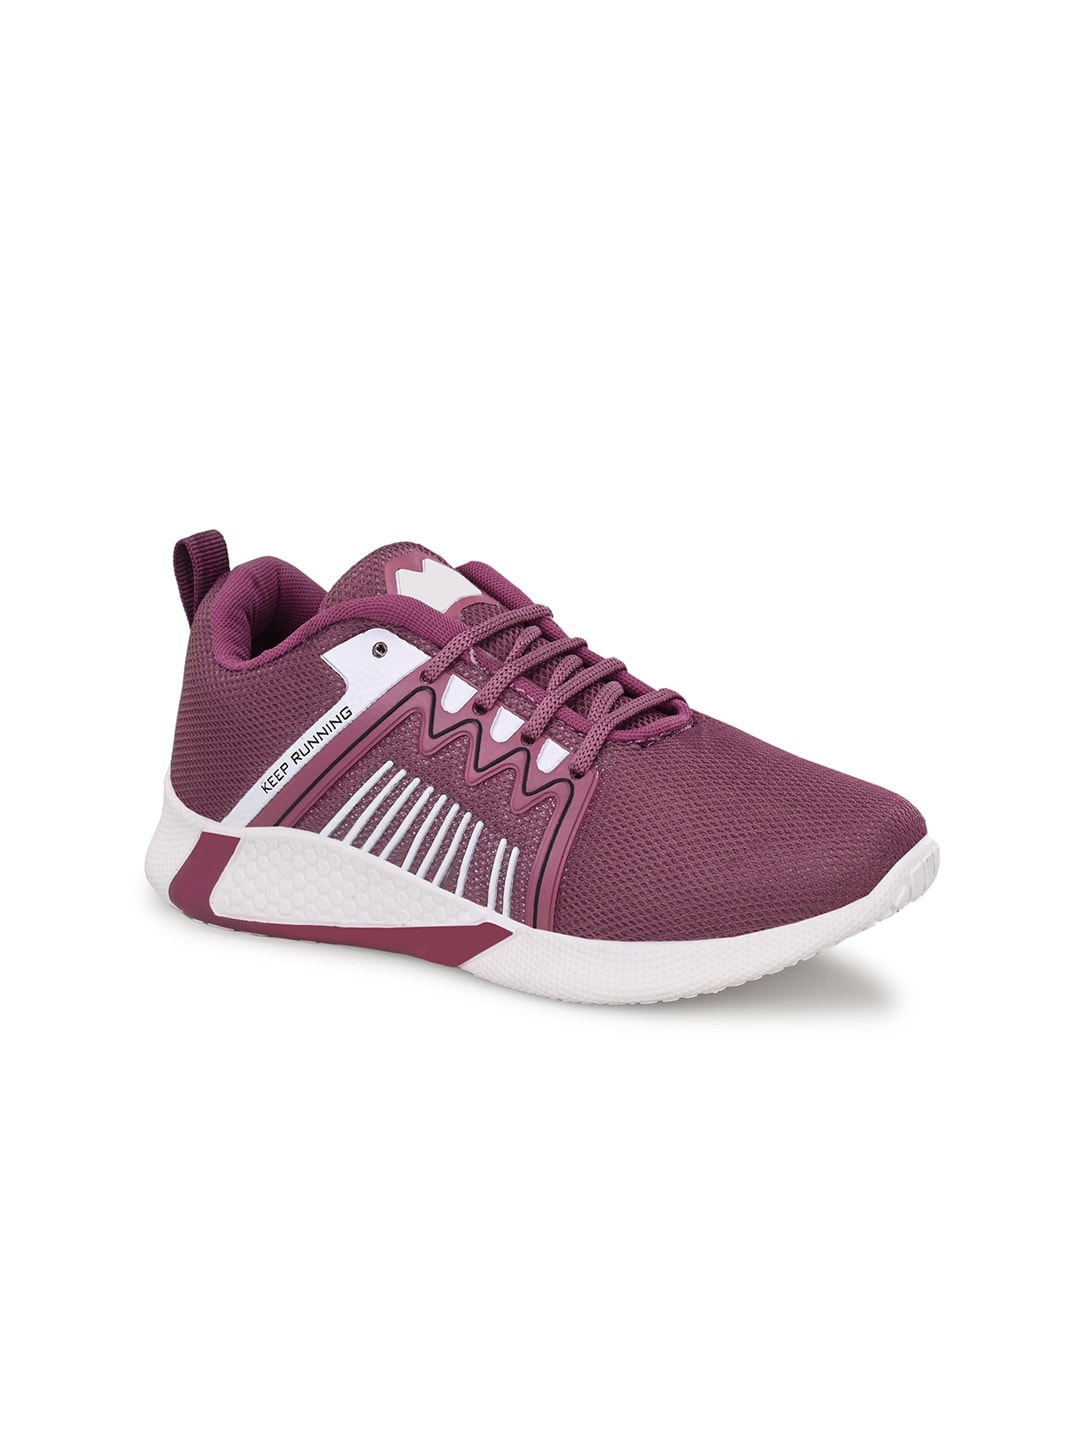 HERE&NOW Women Mauve Striped Sneakers Price in India